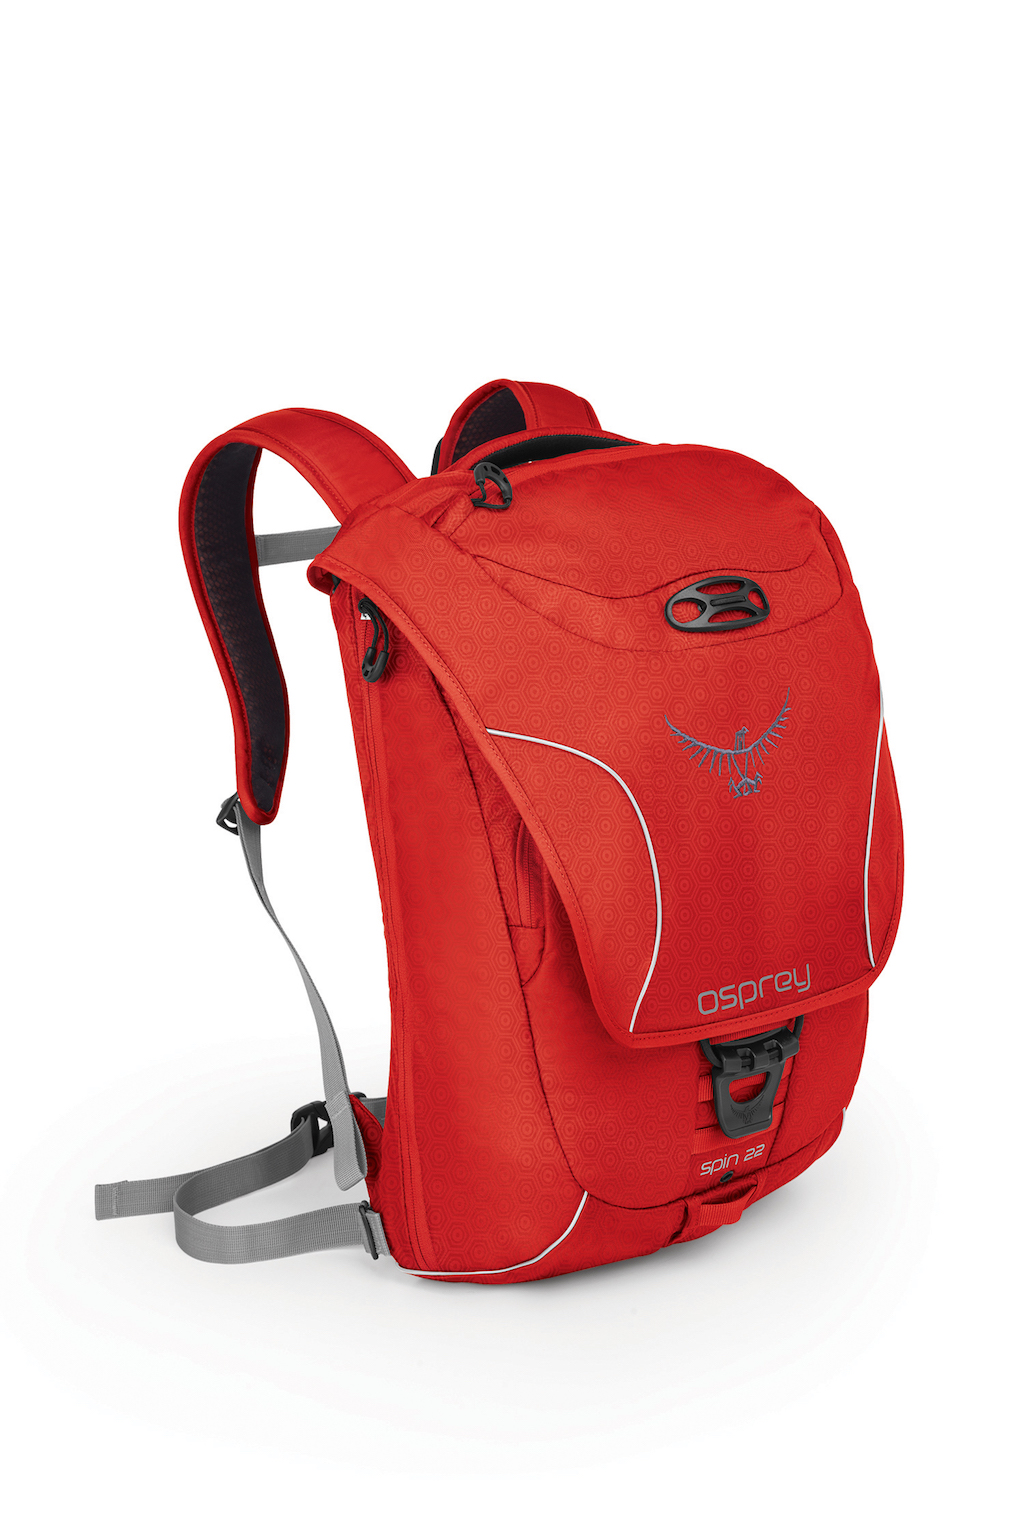 Spin 22 Backpack Review | Momentum Mag